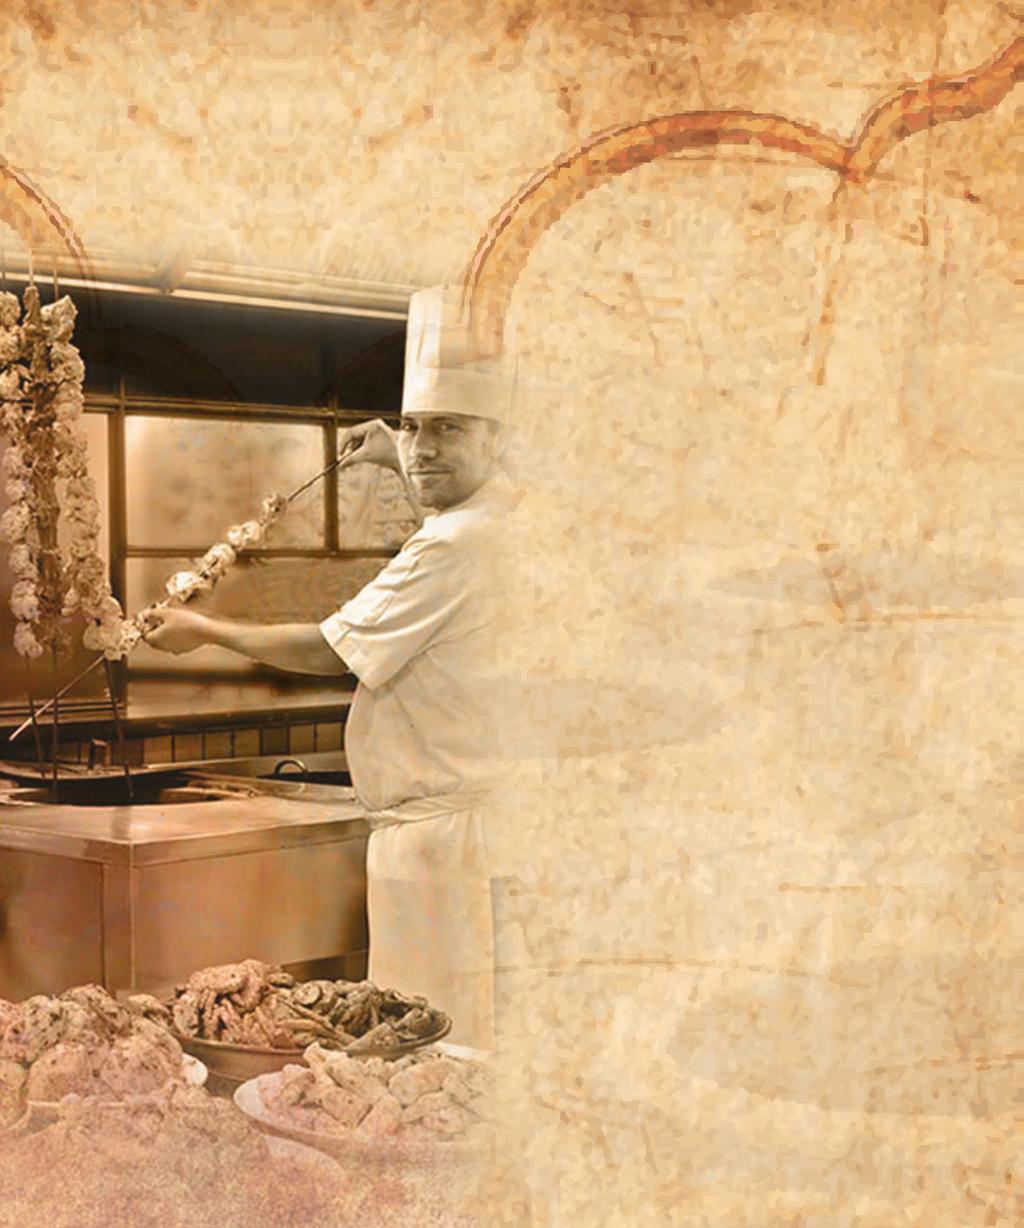 The World s Largest Range of Commercial & Home Tandoor Ovens Golden Tandoors The Name says it all, Redefining Tandoor Ovens hand crafted by artisans using centuries old techniques of making Clay